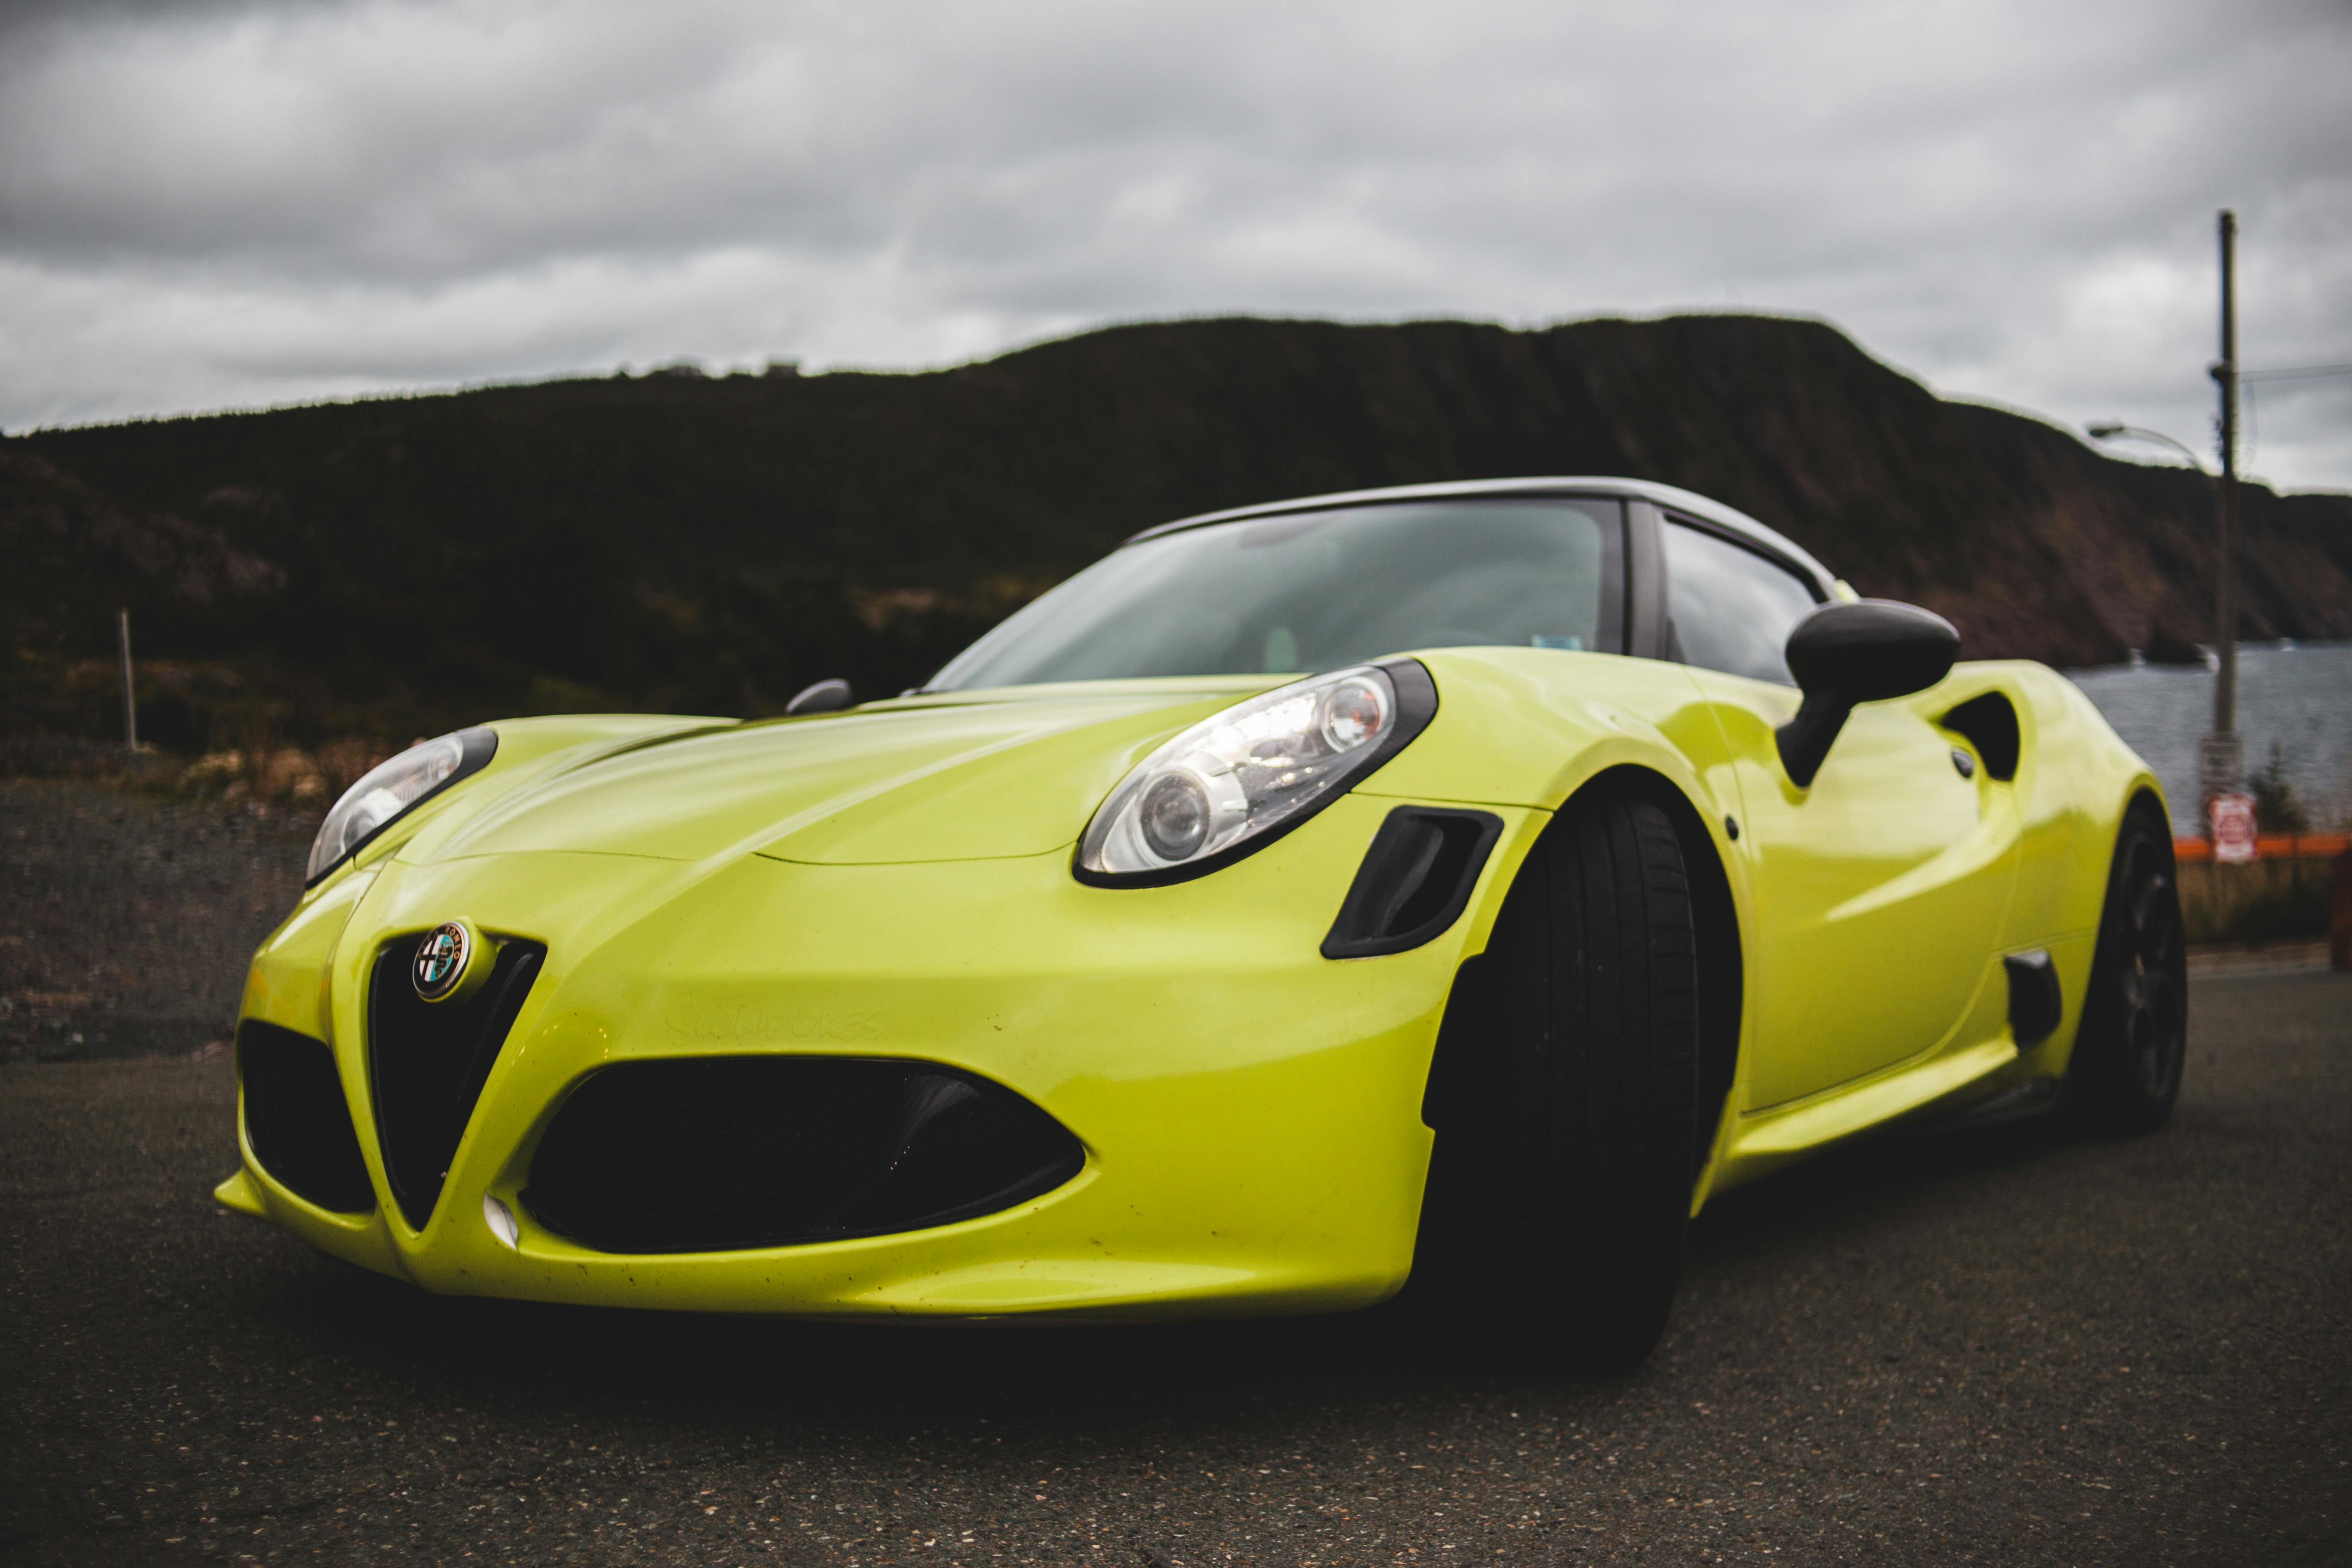 Luxury sports car behind mount silhouette in overcast weather · Free Stock  Photo